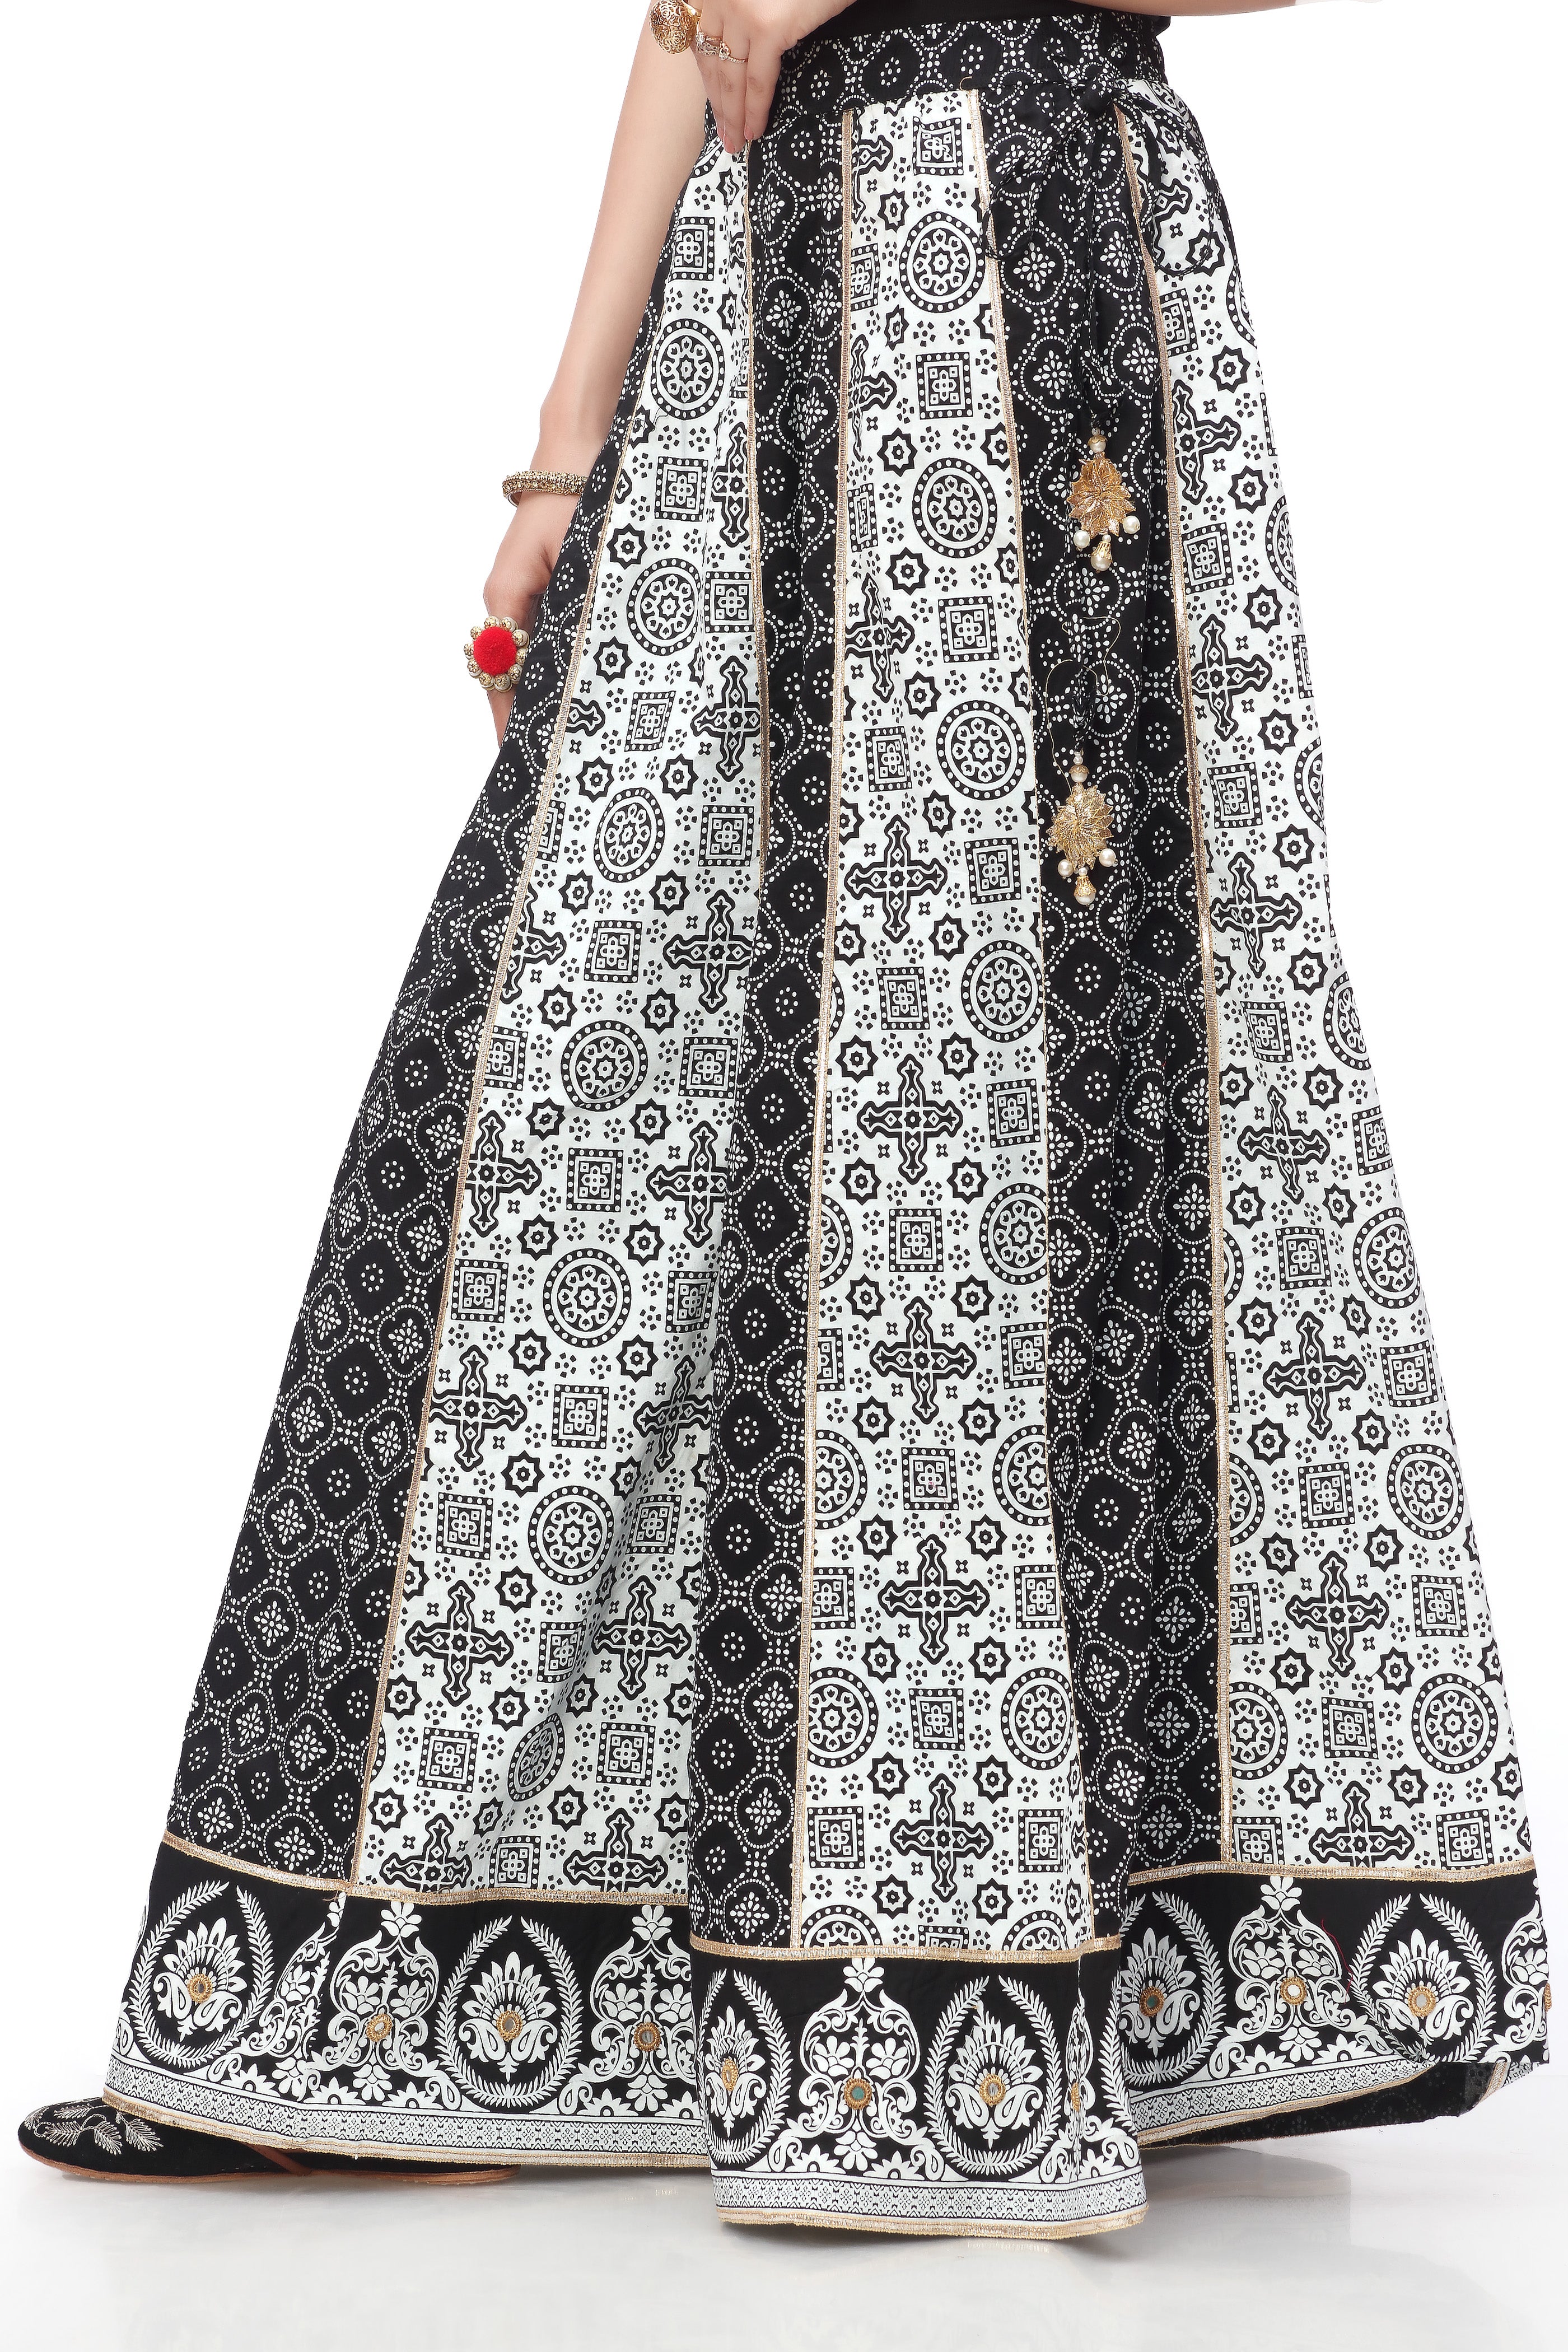 Monocrome Skirt in Black coloured Printed Cambric fabric